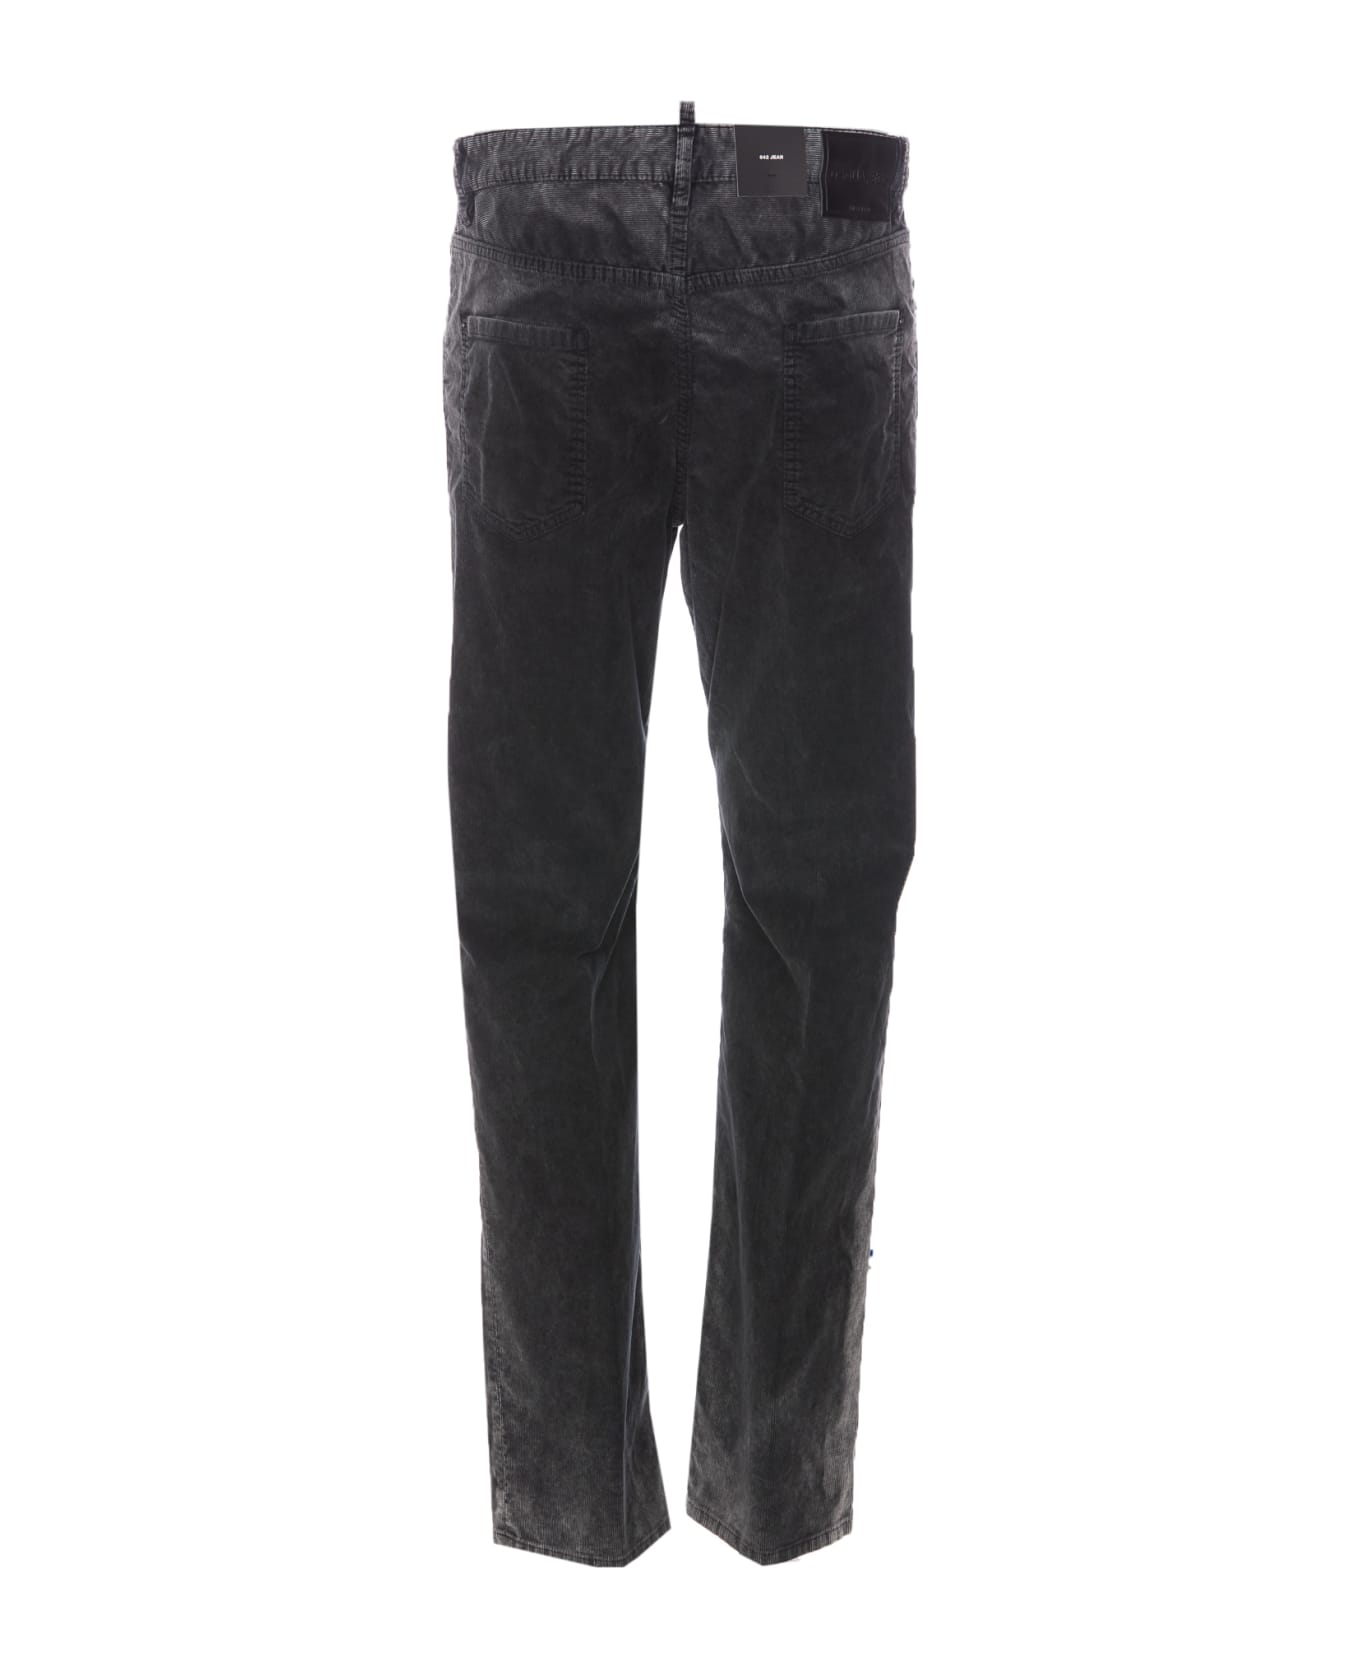 Dsquared2 Corduroy Trousers - Black ボトムス